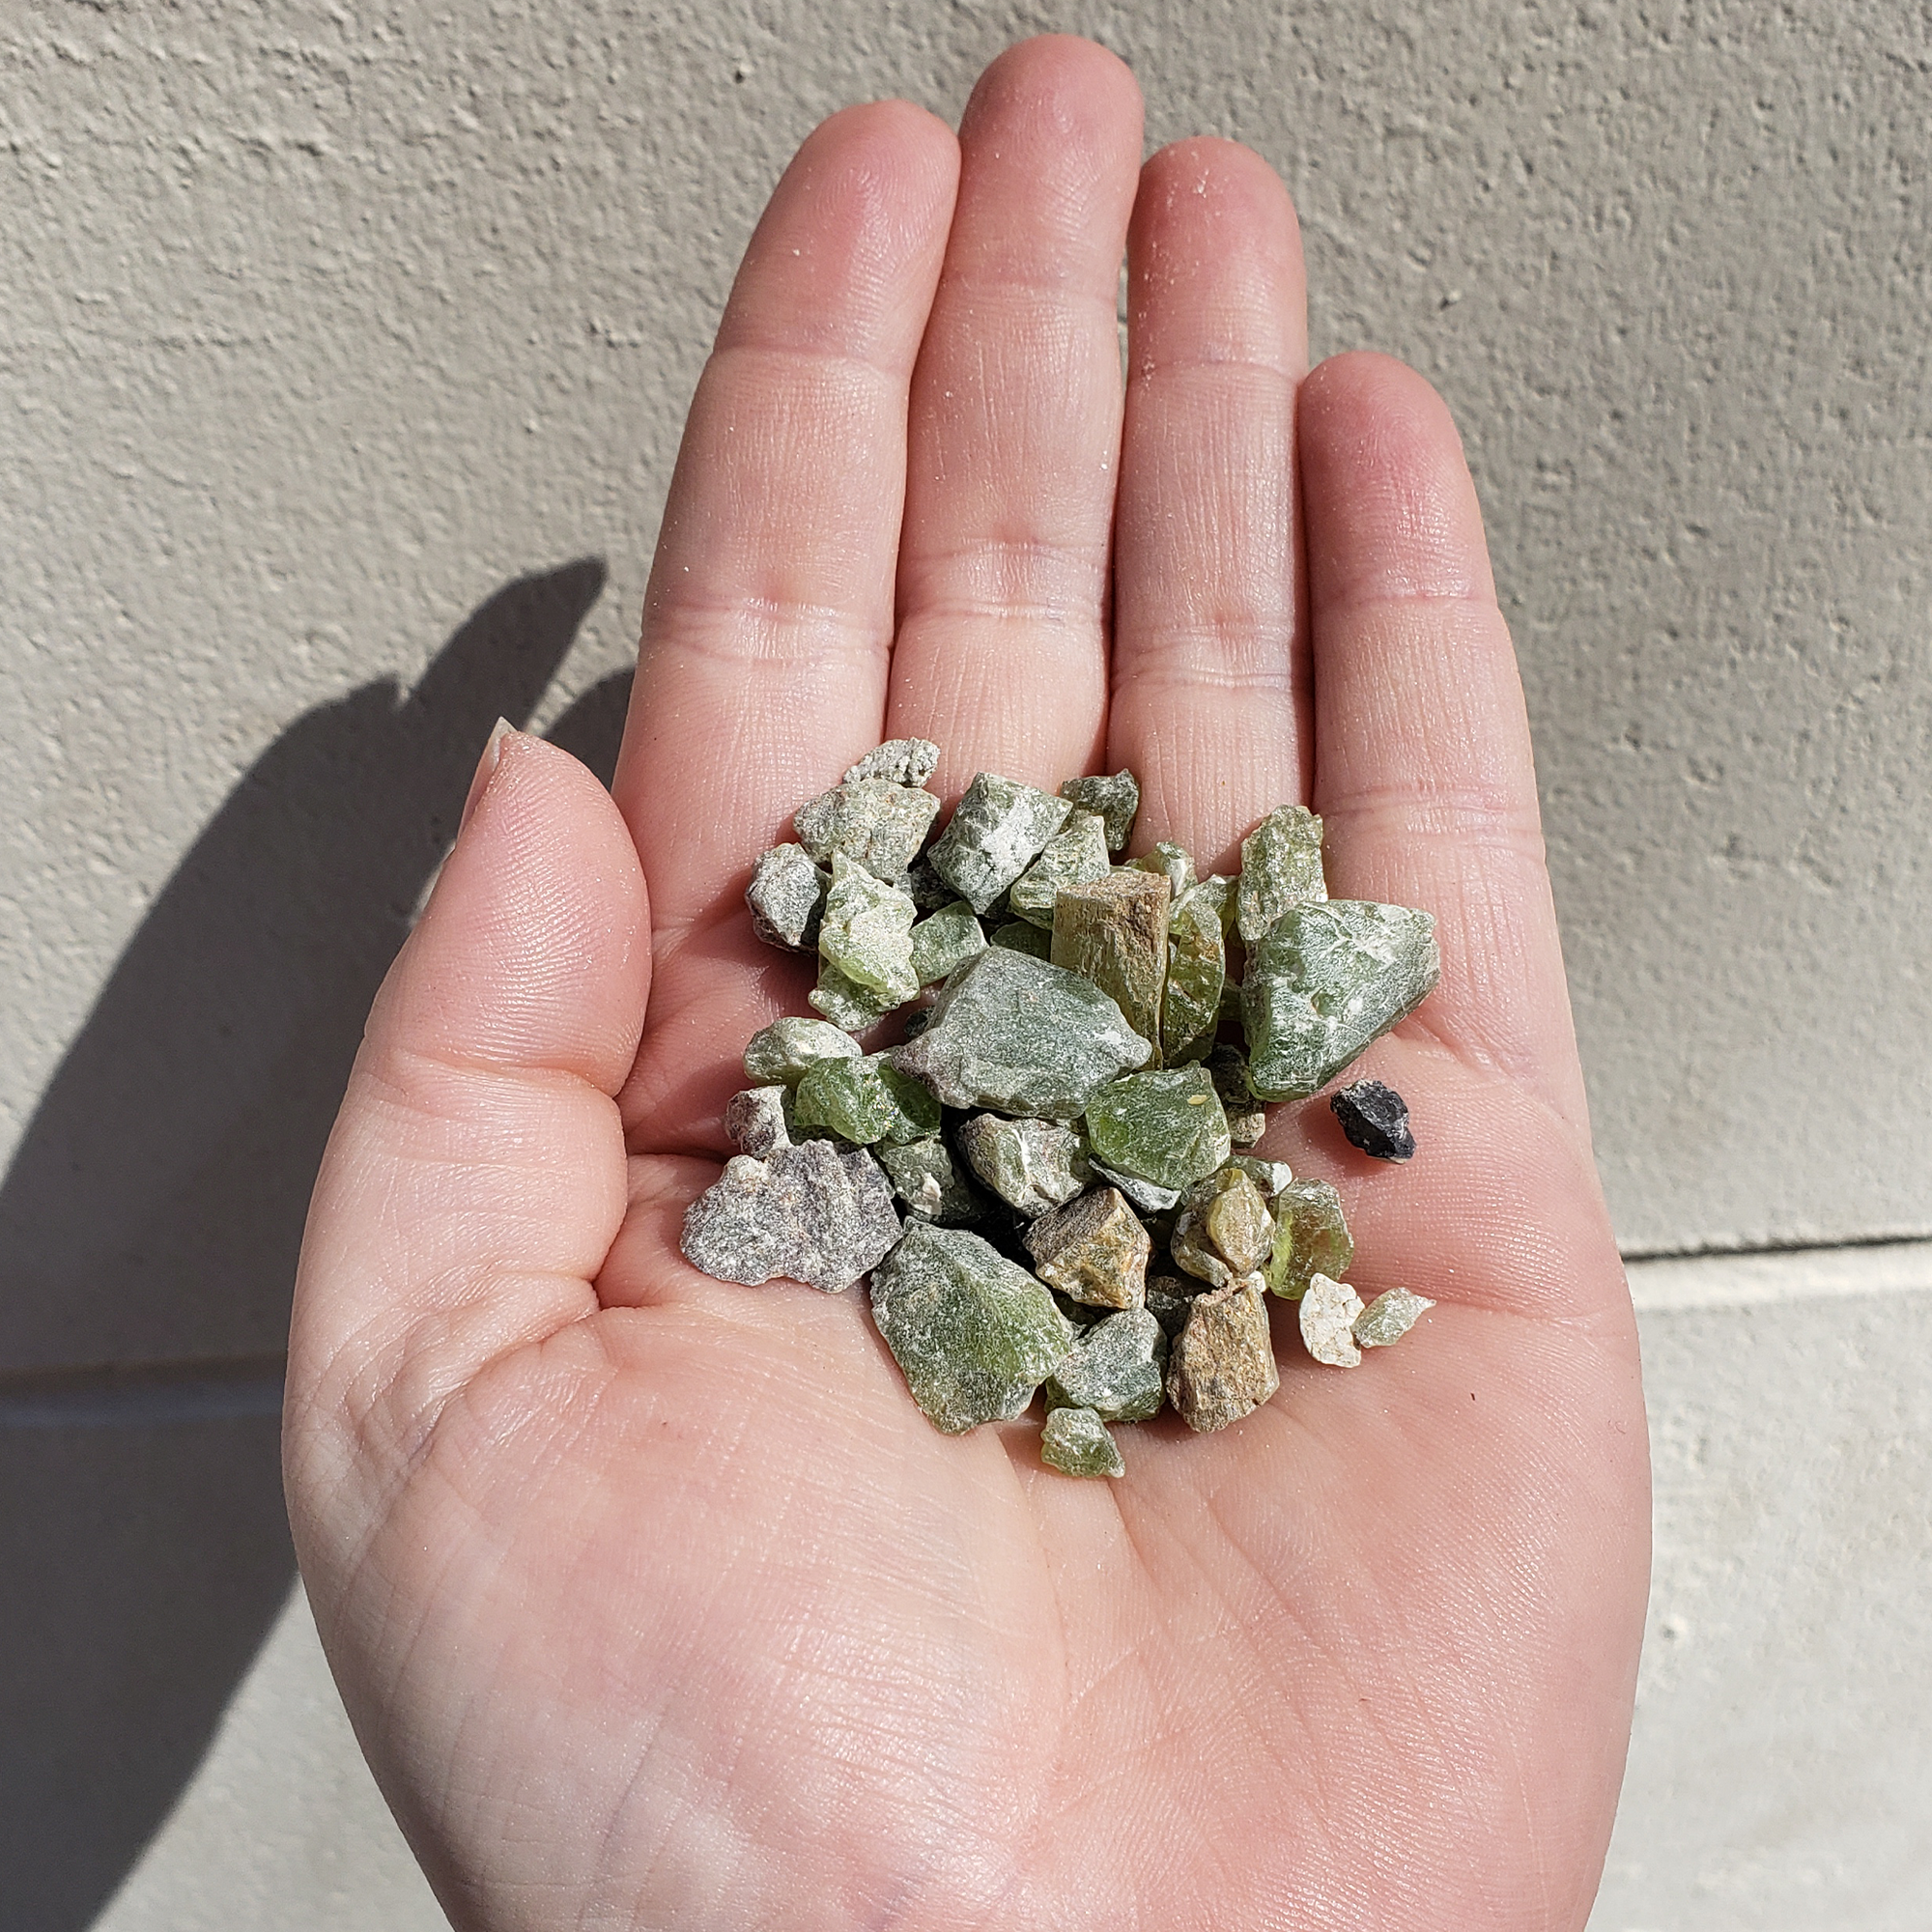 RAW Peridot Natural Rough Crystal Chips by the Ounce - 6